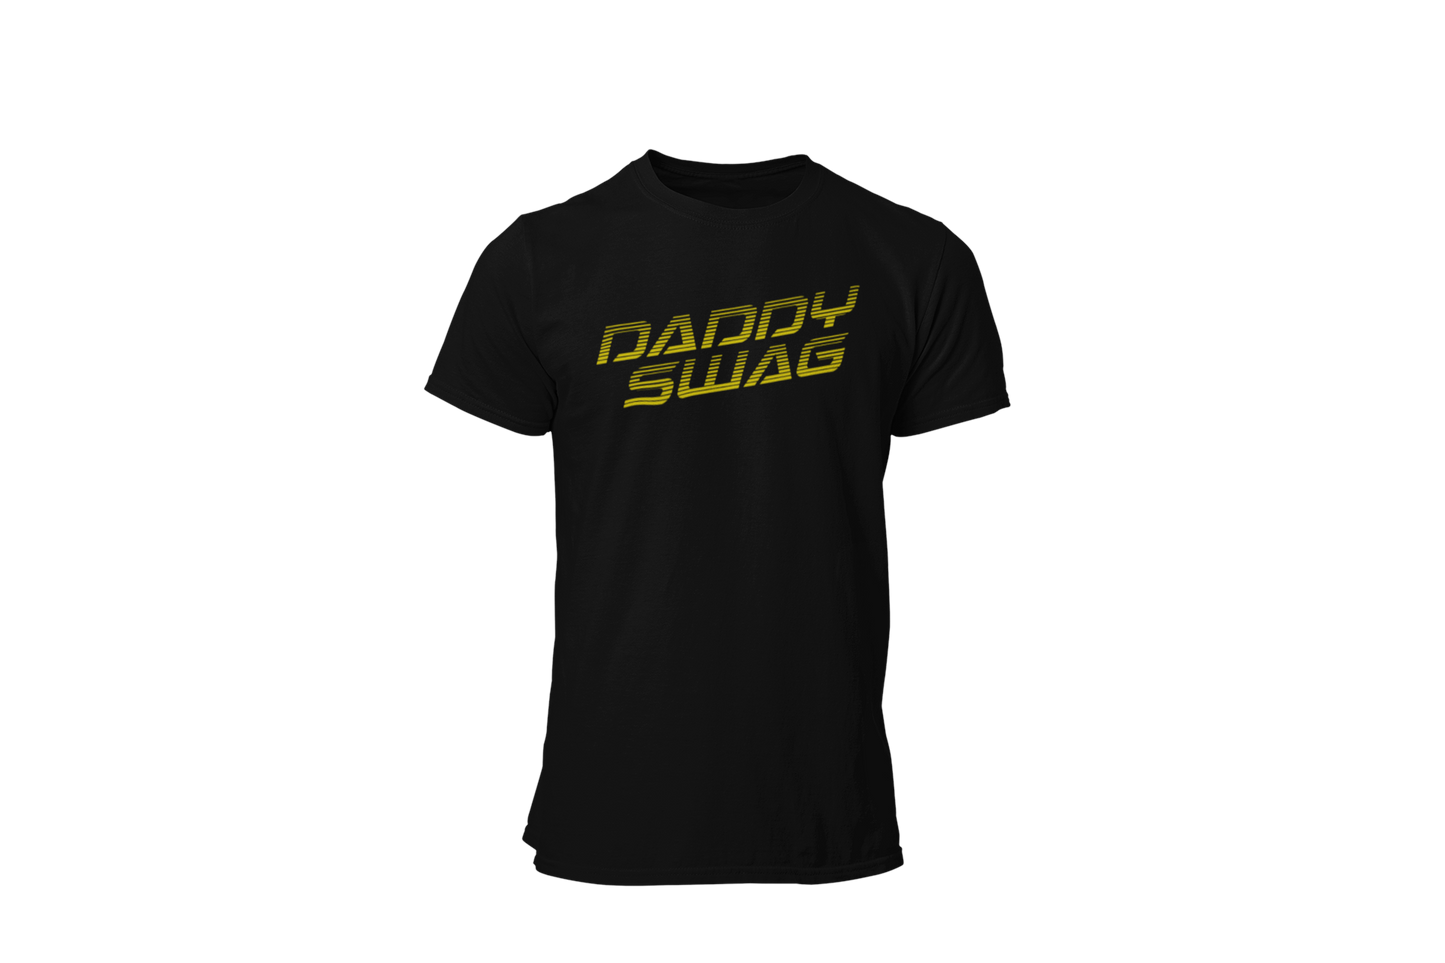 DADDY SWAG FATHER IS FUTURE COLLECTION T-SHIRT